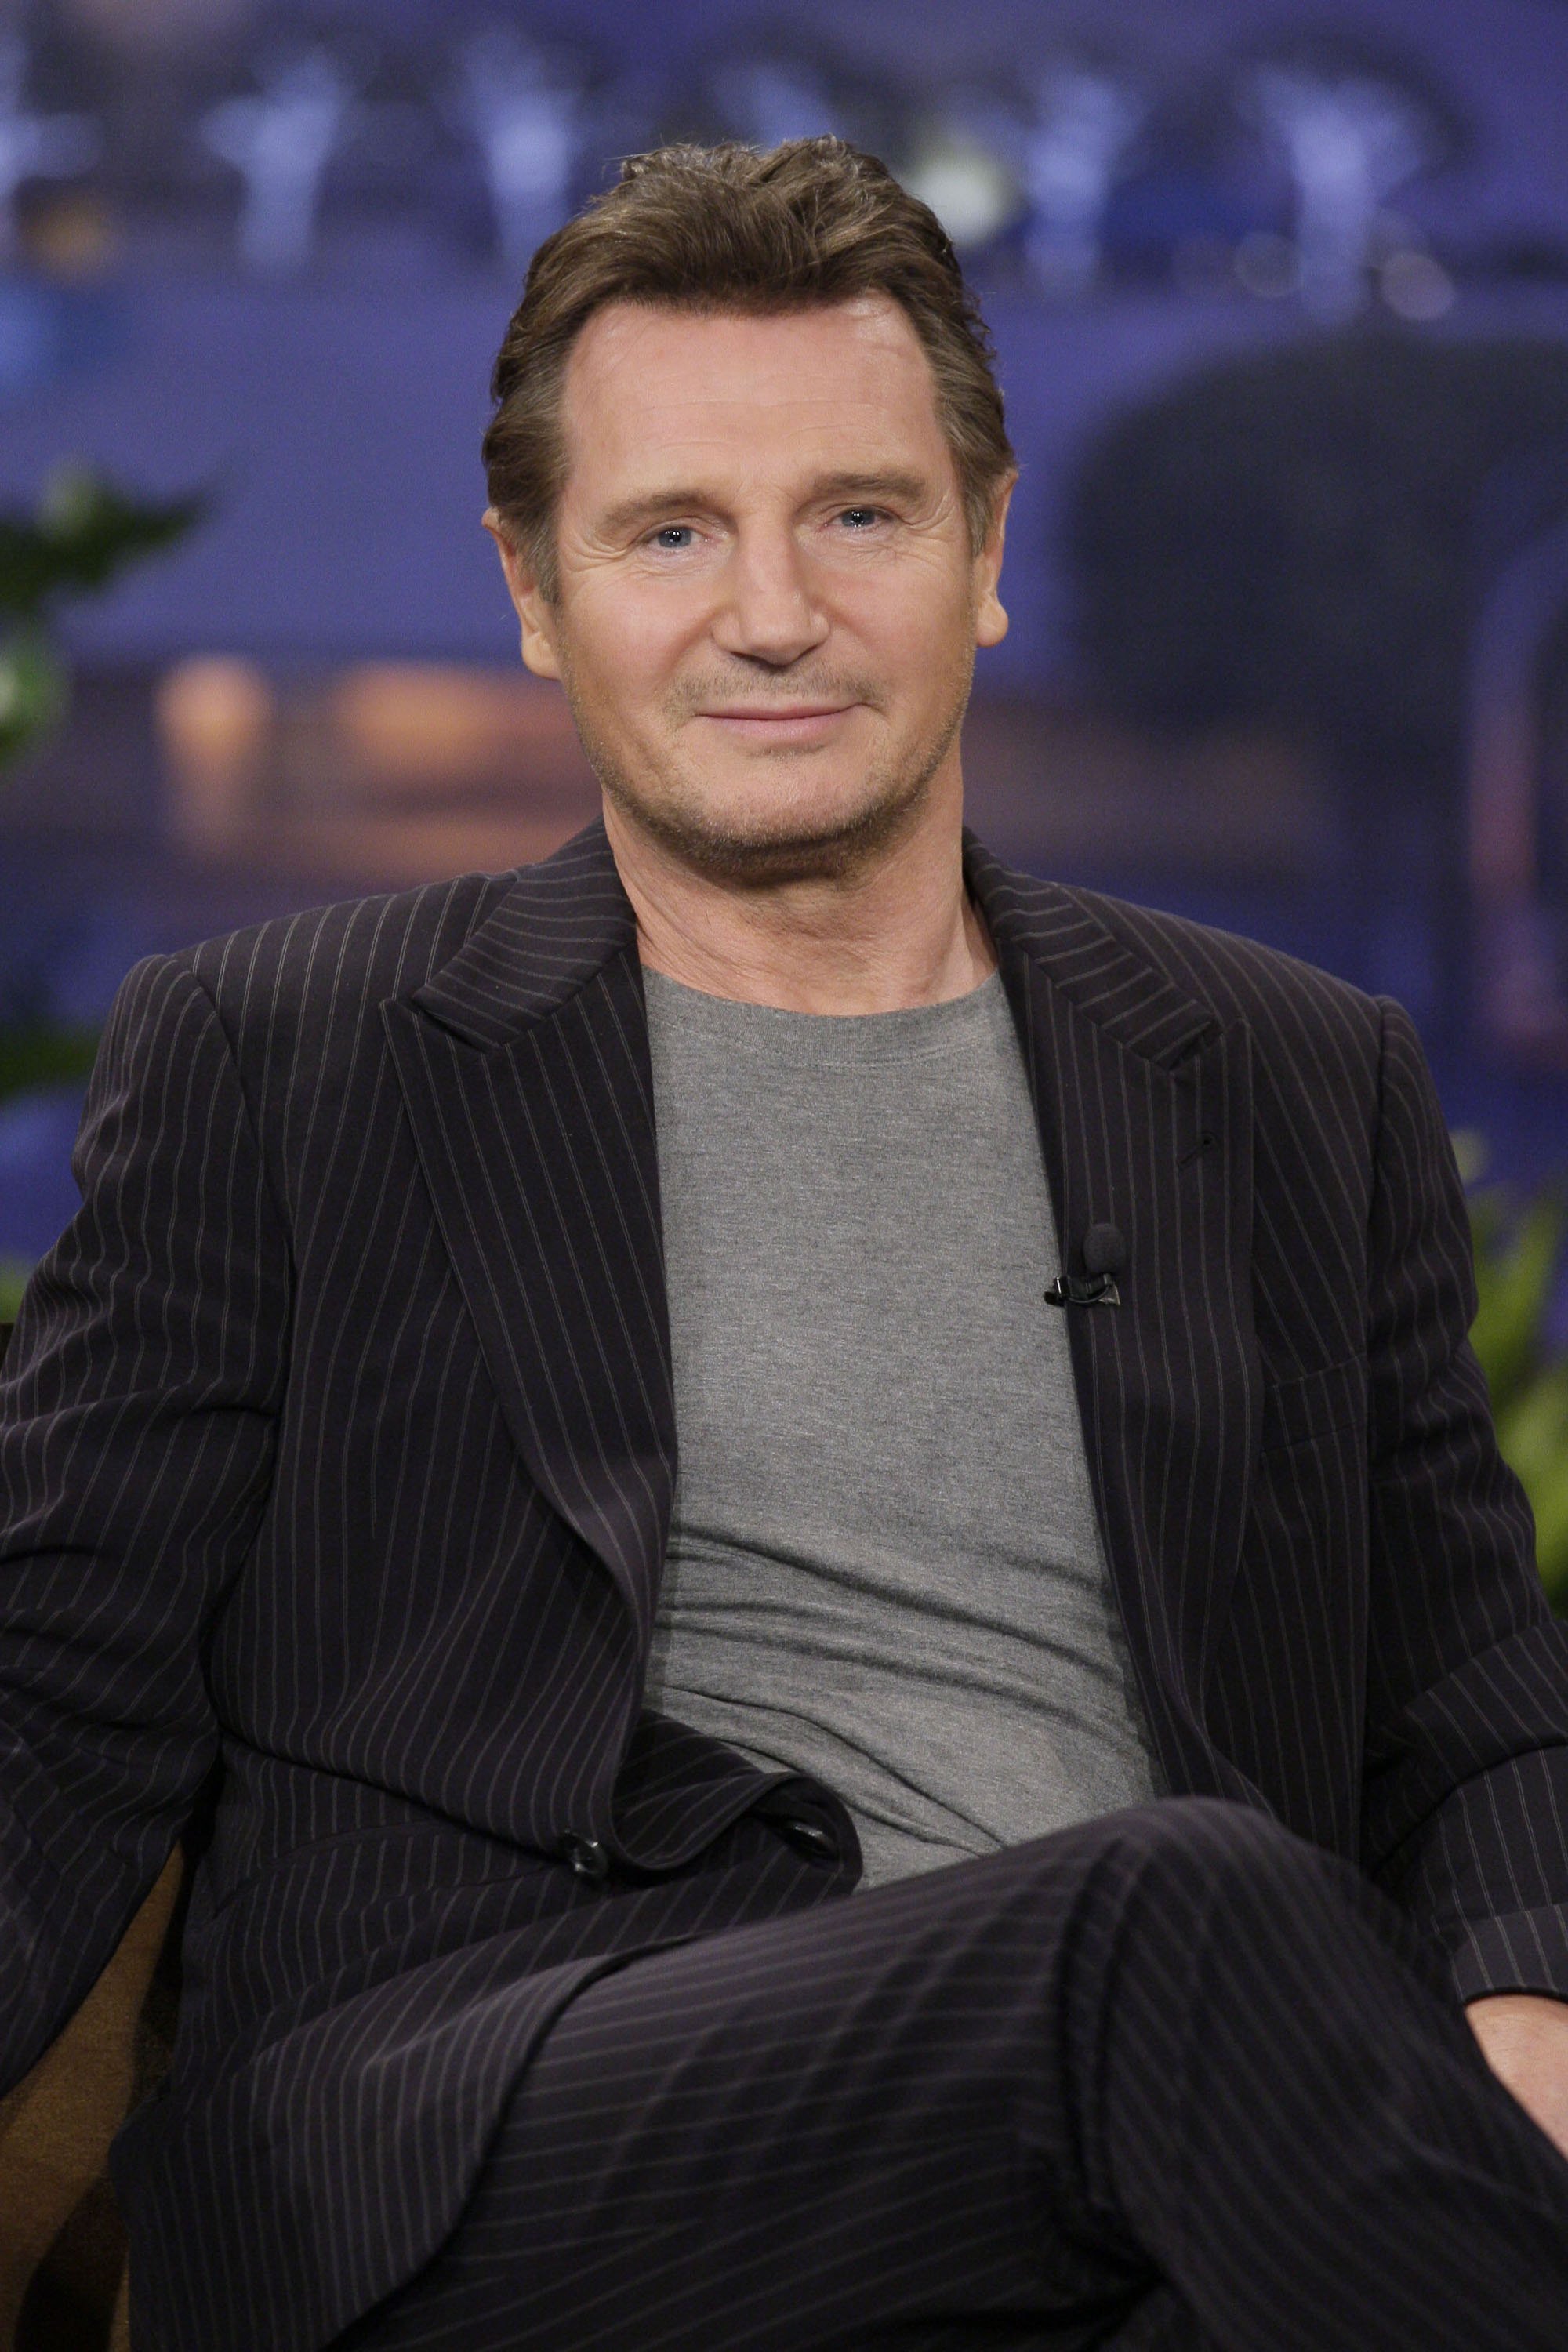 Liam Neeson during an interview on January 11, 2012. | Source: Getty Images